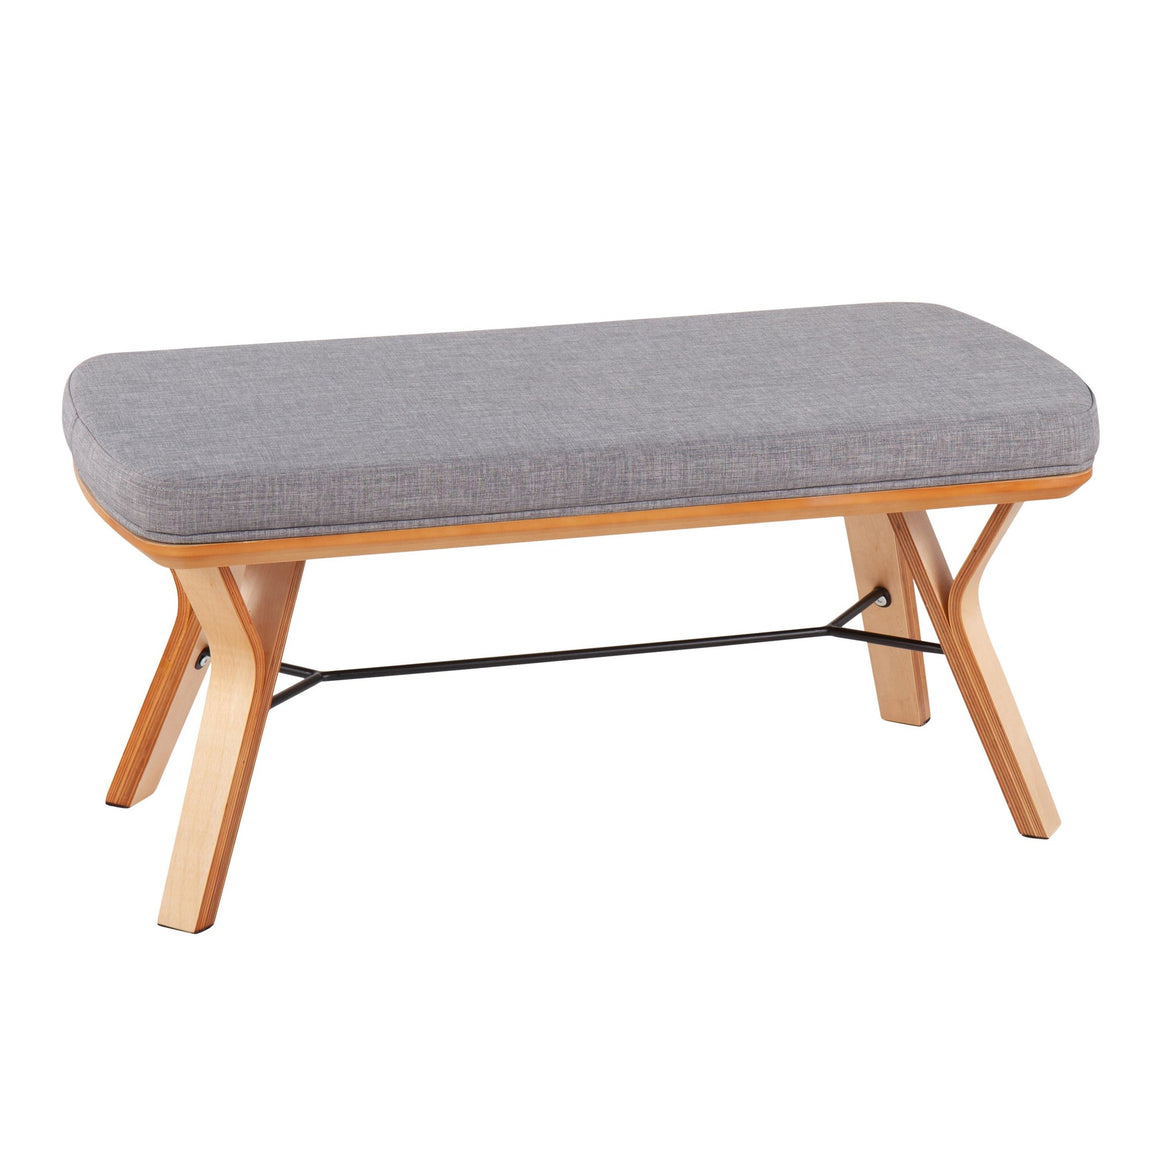 Folia Mid-Century Modern Bench in Natural Wood and Light Grey Fabric by LumiSource